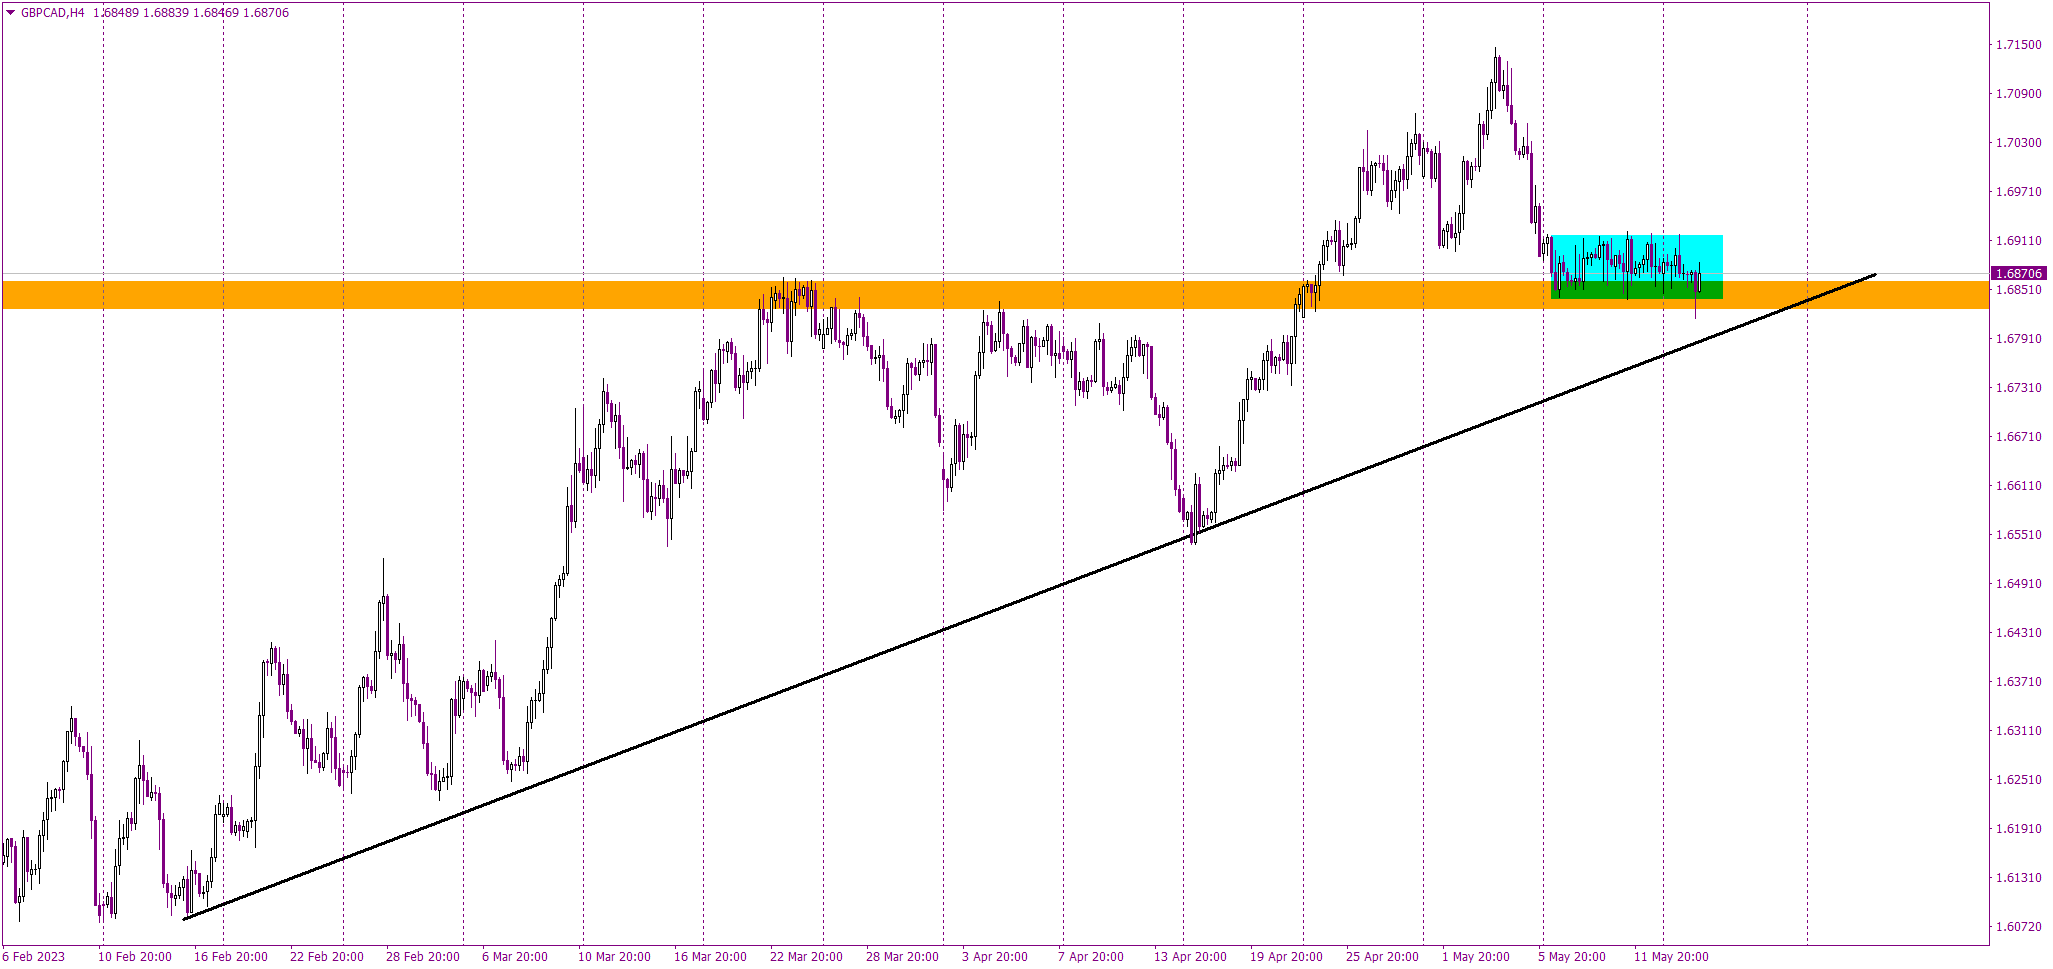 False breakout on the GBPCAD?